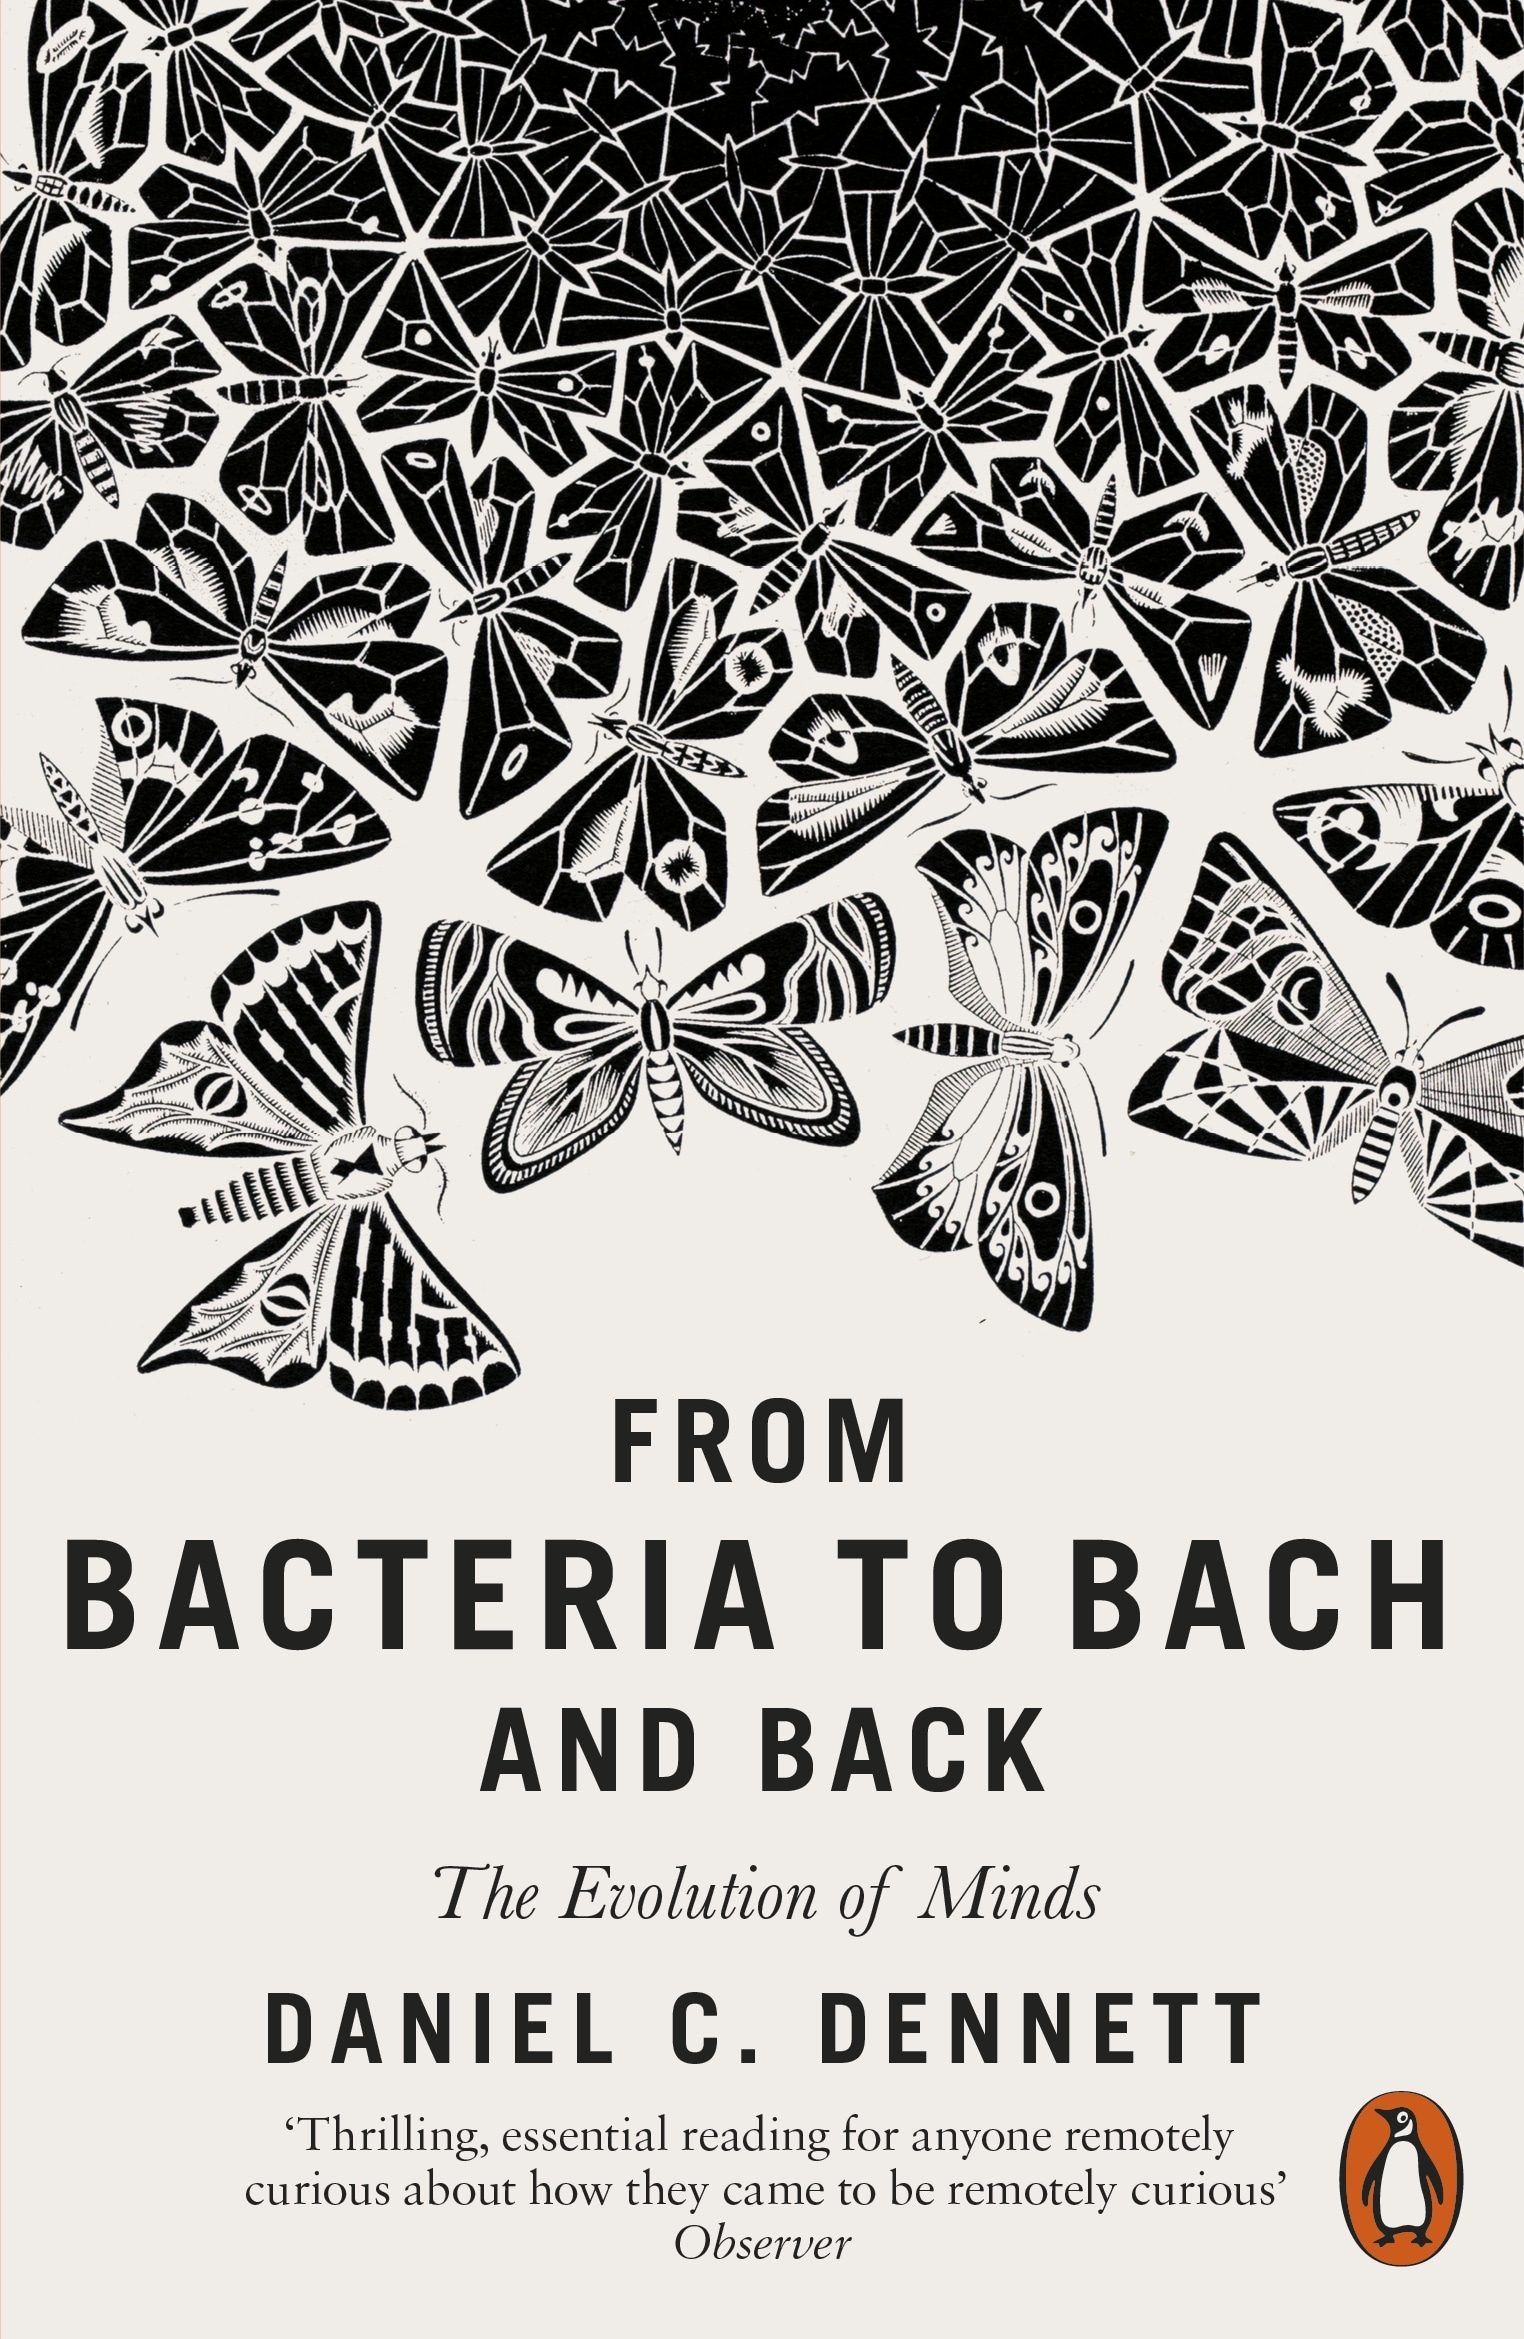 Book “From Bacteria to Bach and Back” by Daniel C. Dennett — January 25, 2018